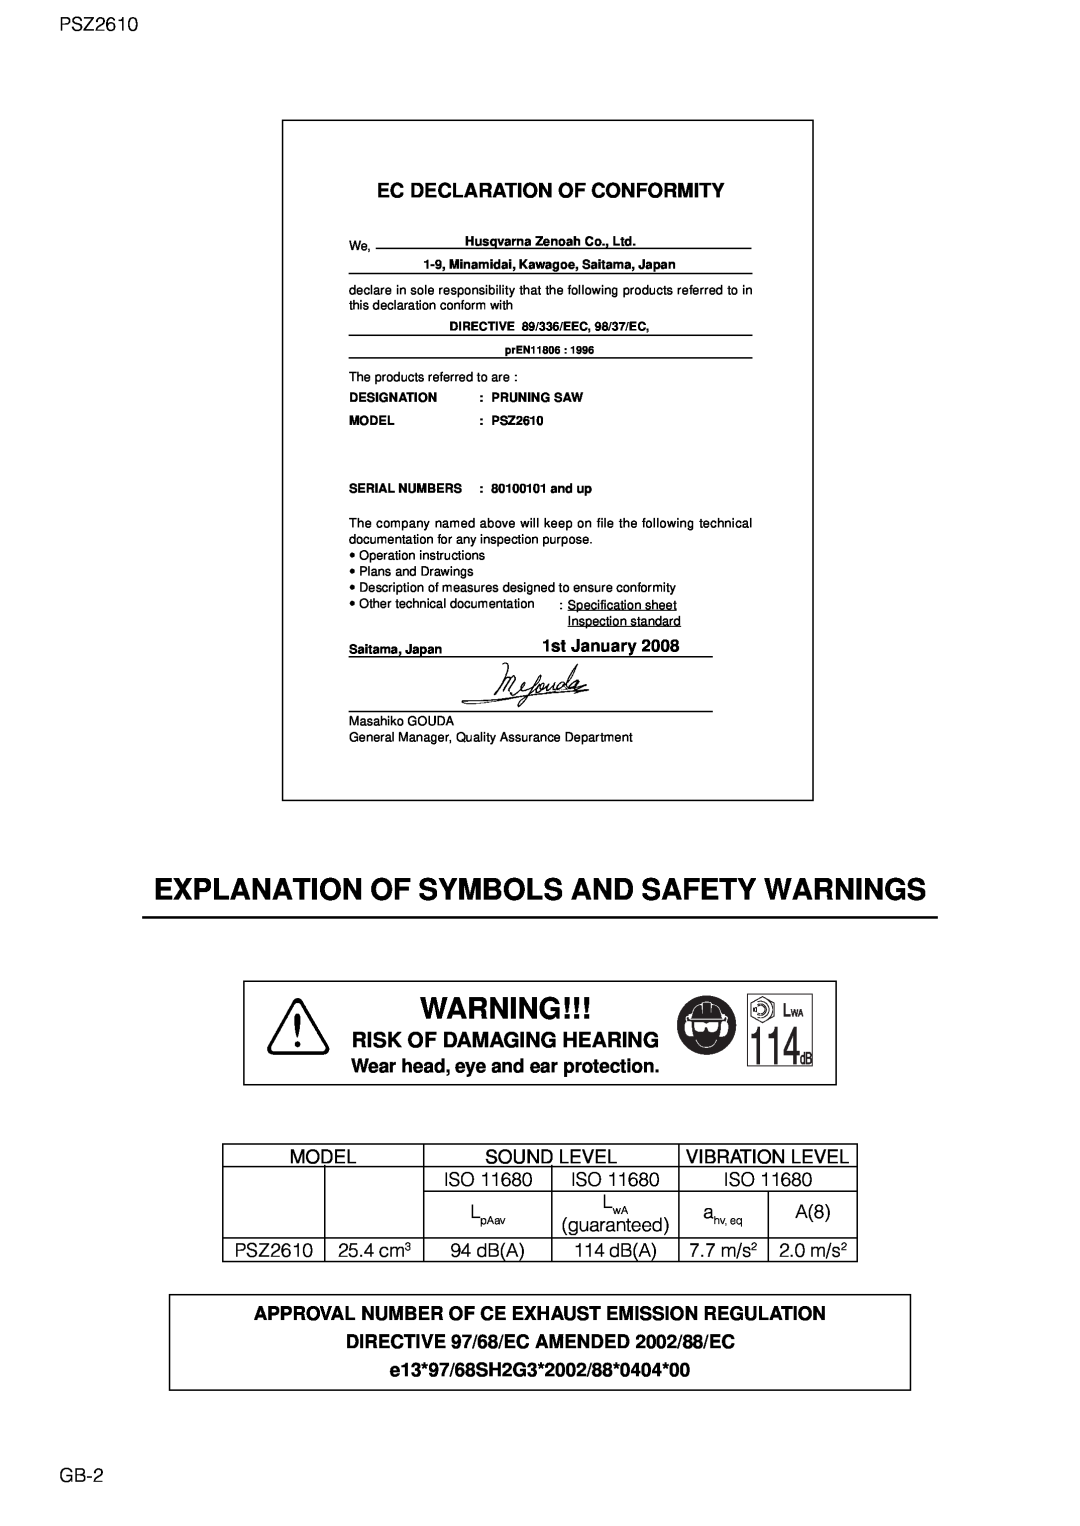 Zenoah PSZ2610 owner manual Wear head, eye and ear protection, Approval Number Of Ce Exhaust Emission Regulation 